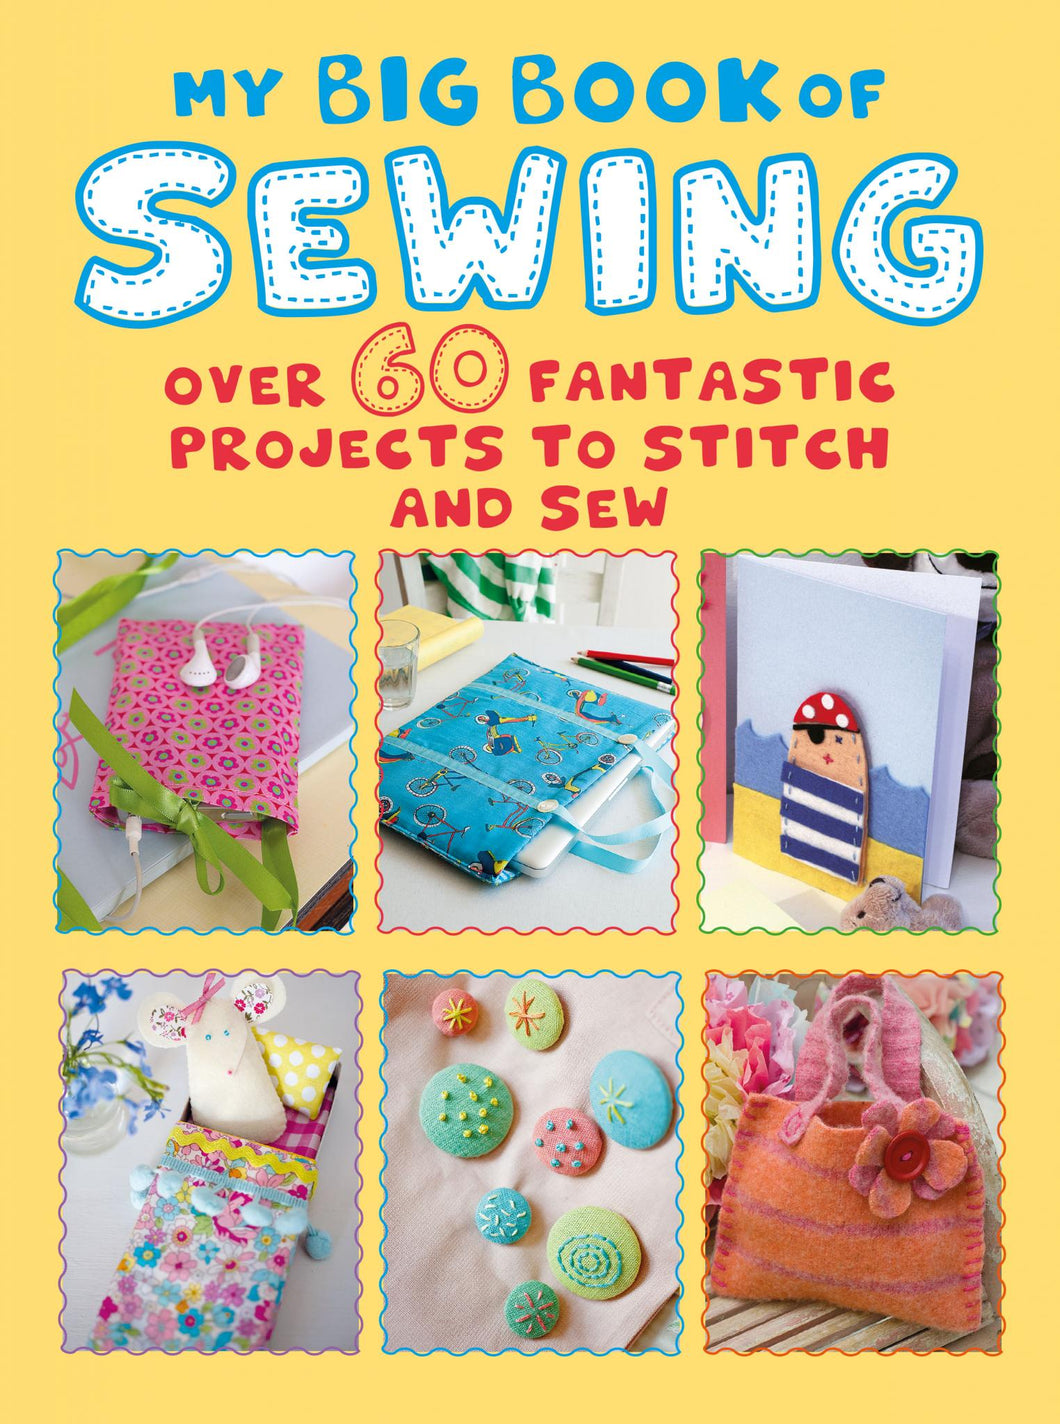 See and Sew: A Sewing Book for Children [Book]